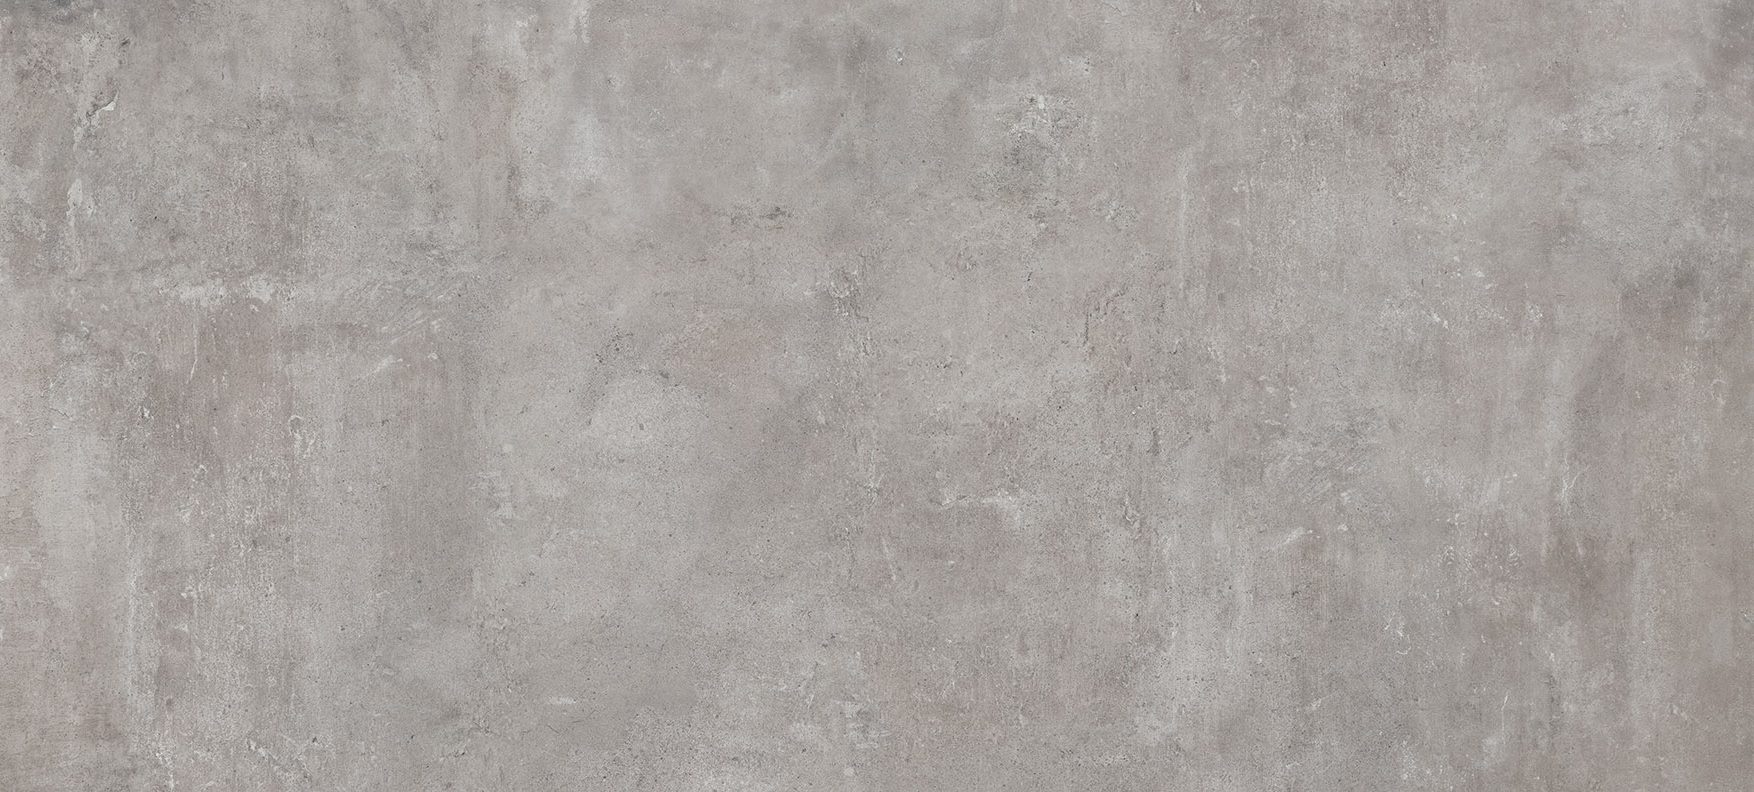 softcement-silver-120x280-1-rotated-1